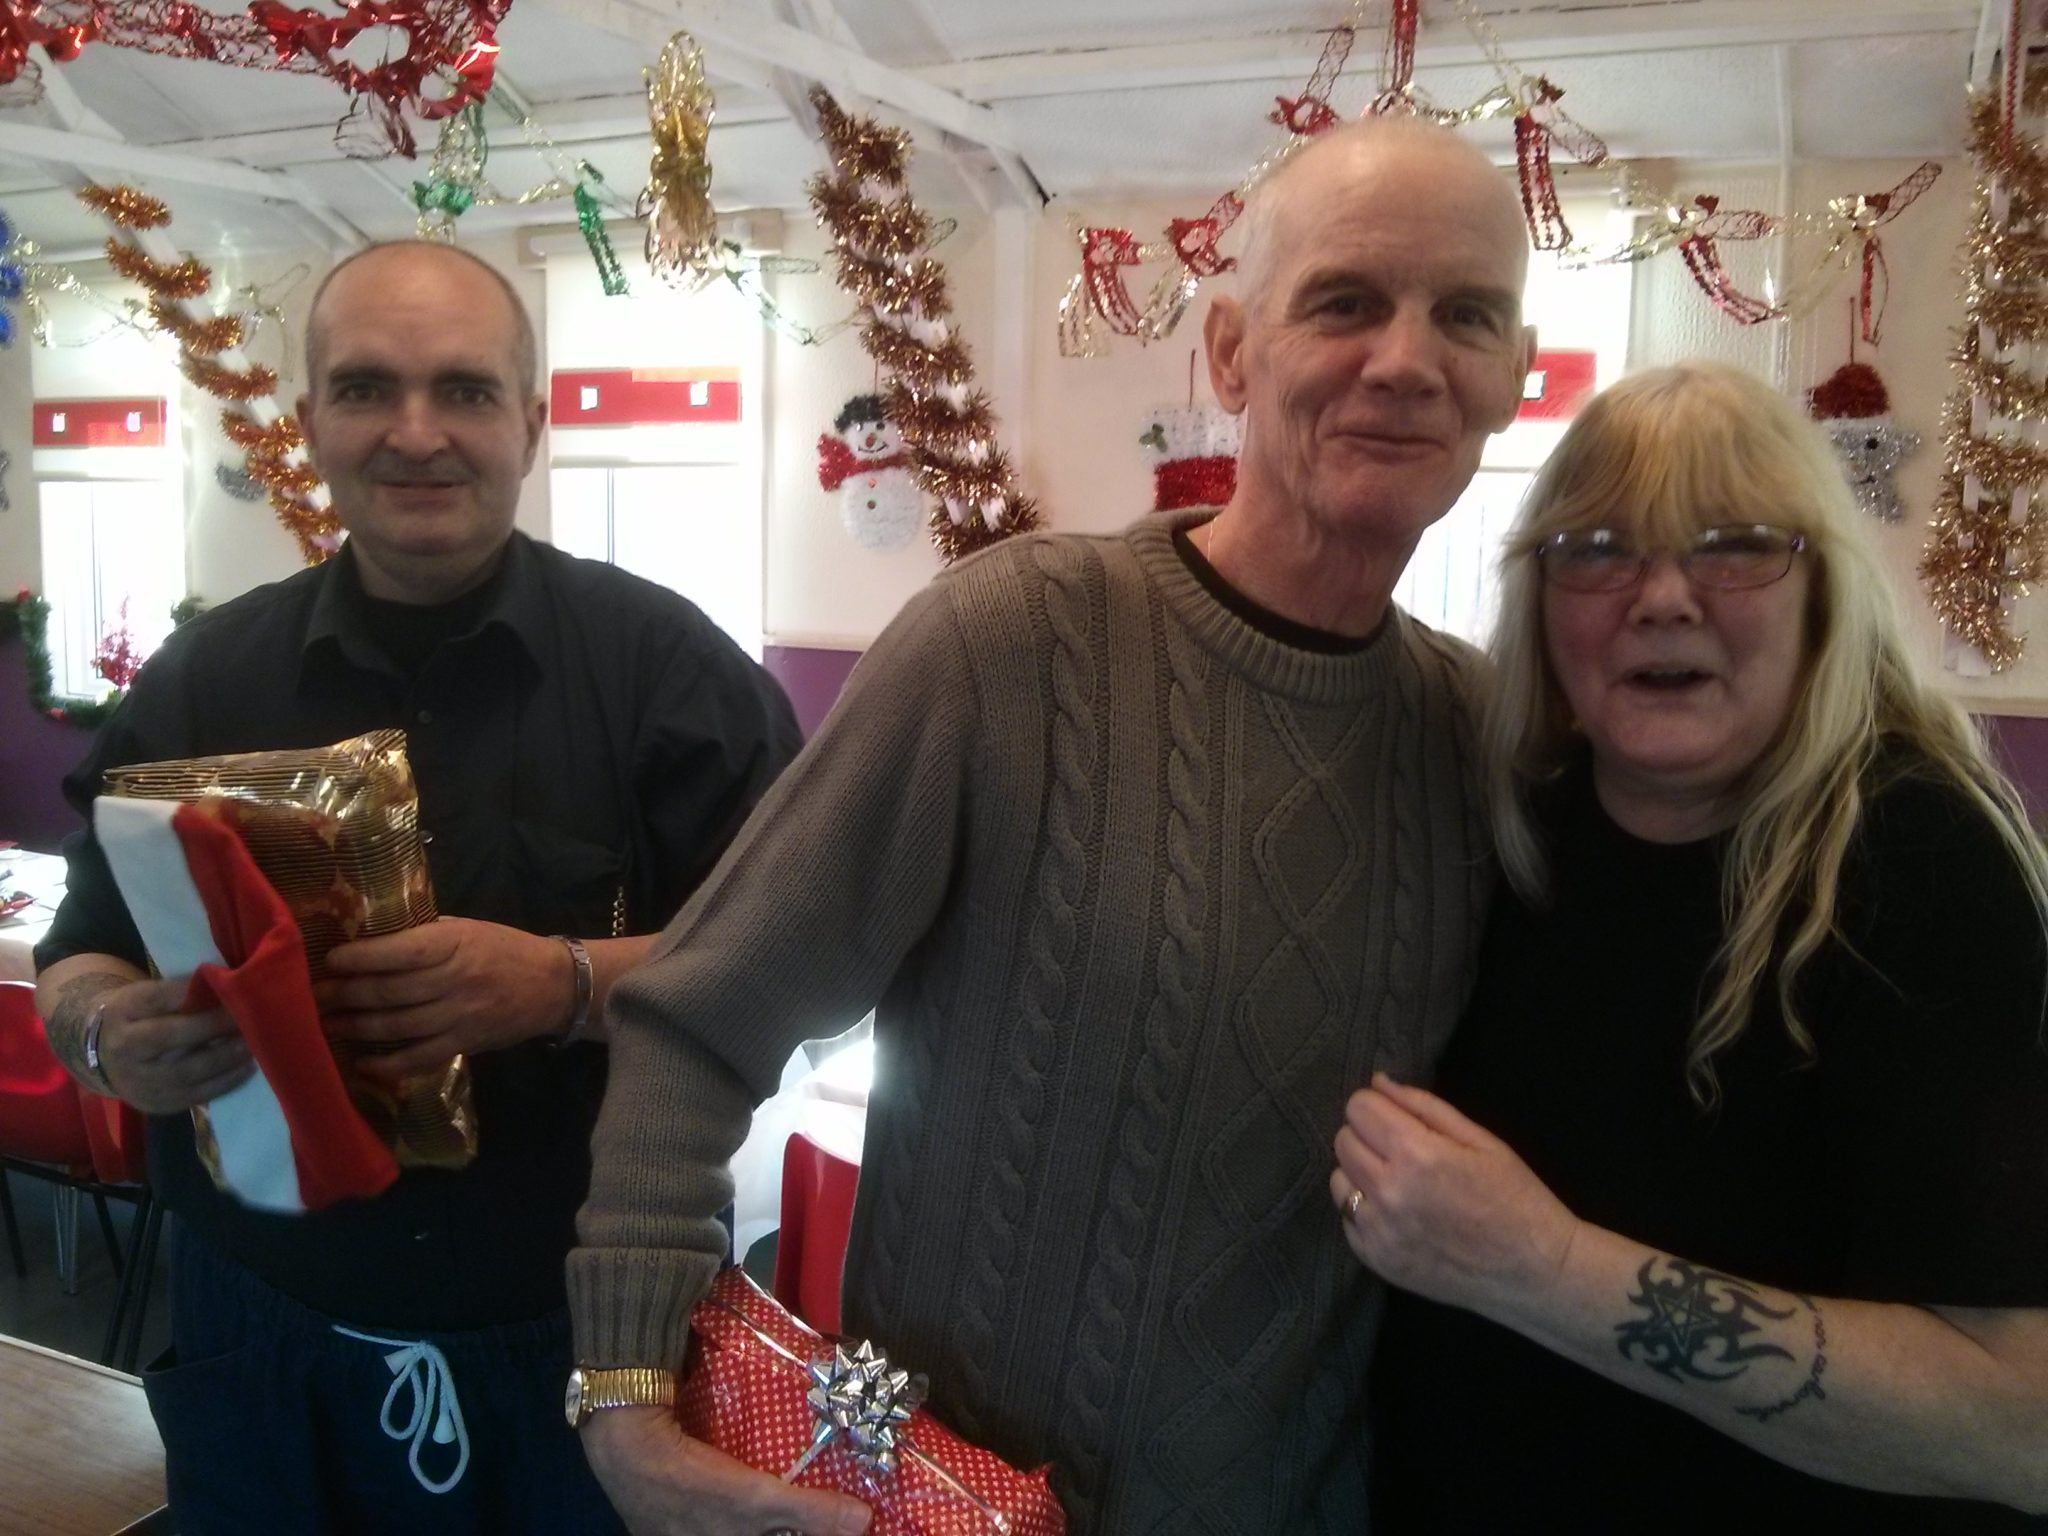 Mike and Diane at today's community Christmas dinner in Cwmbran